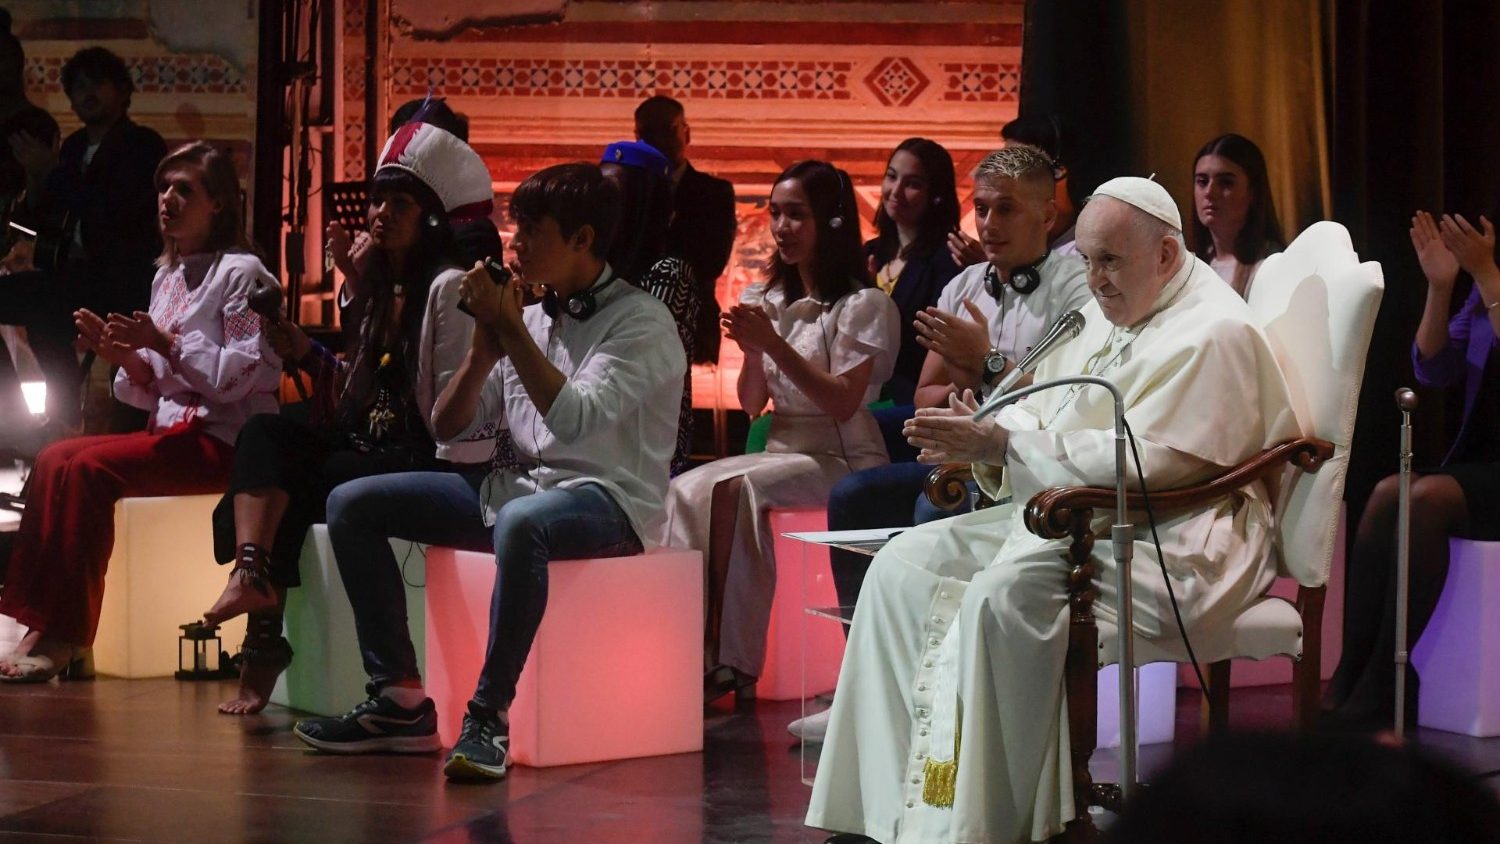 Pope to Economy of Francesco youth: 'Like St. Francis, economy must embrace the poor'